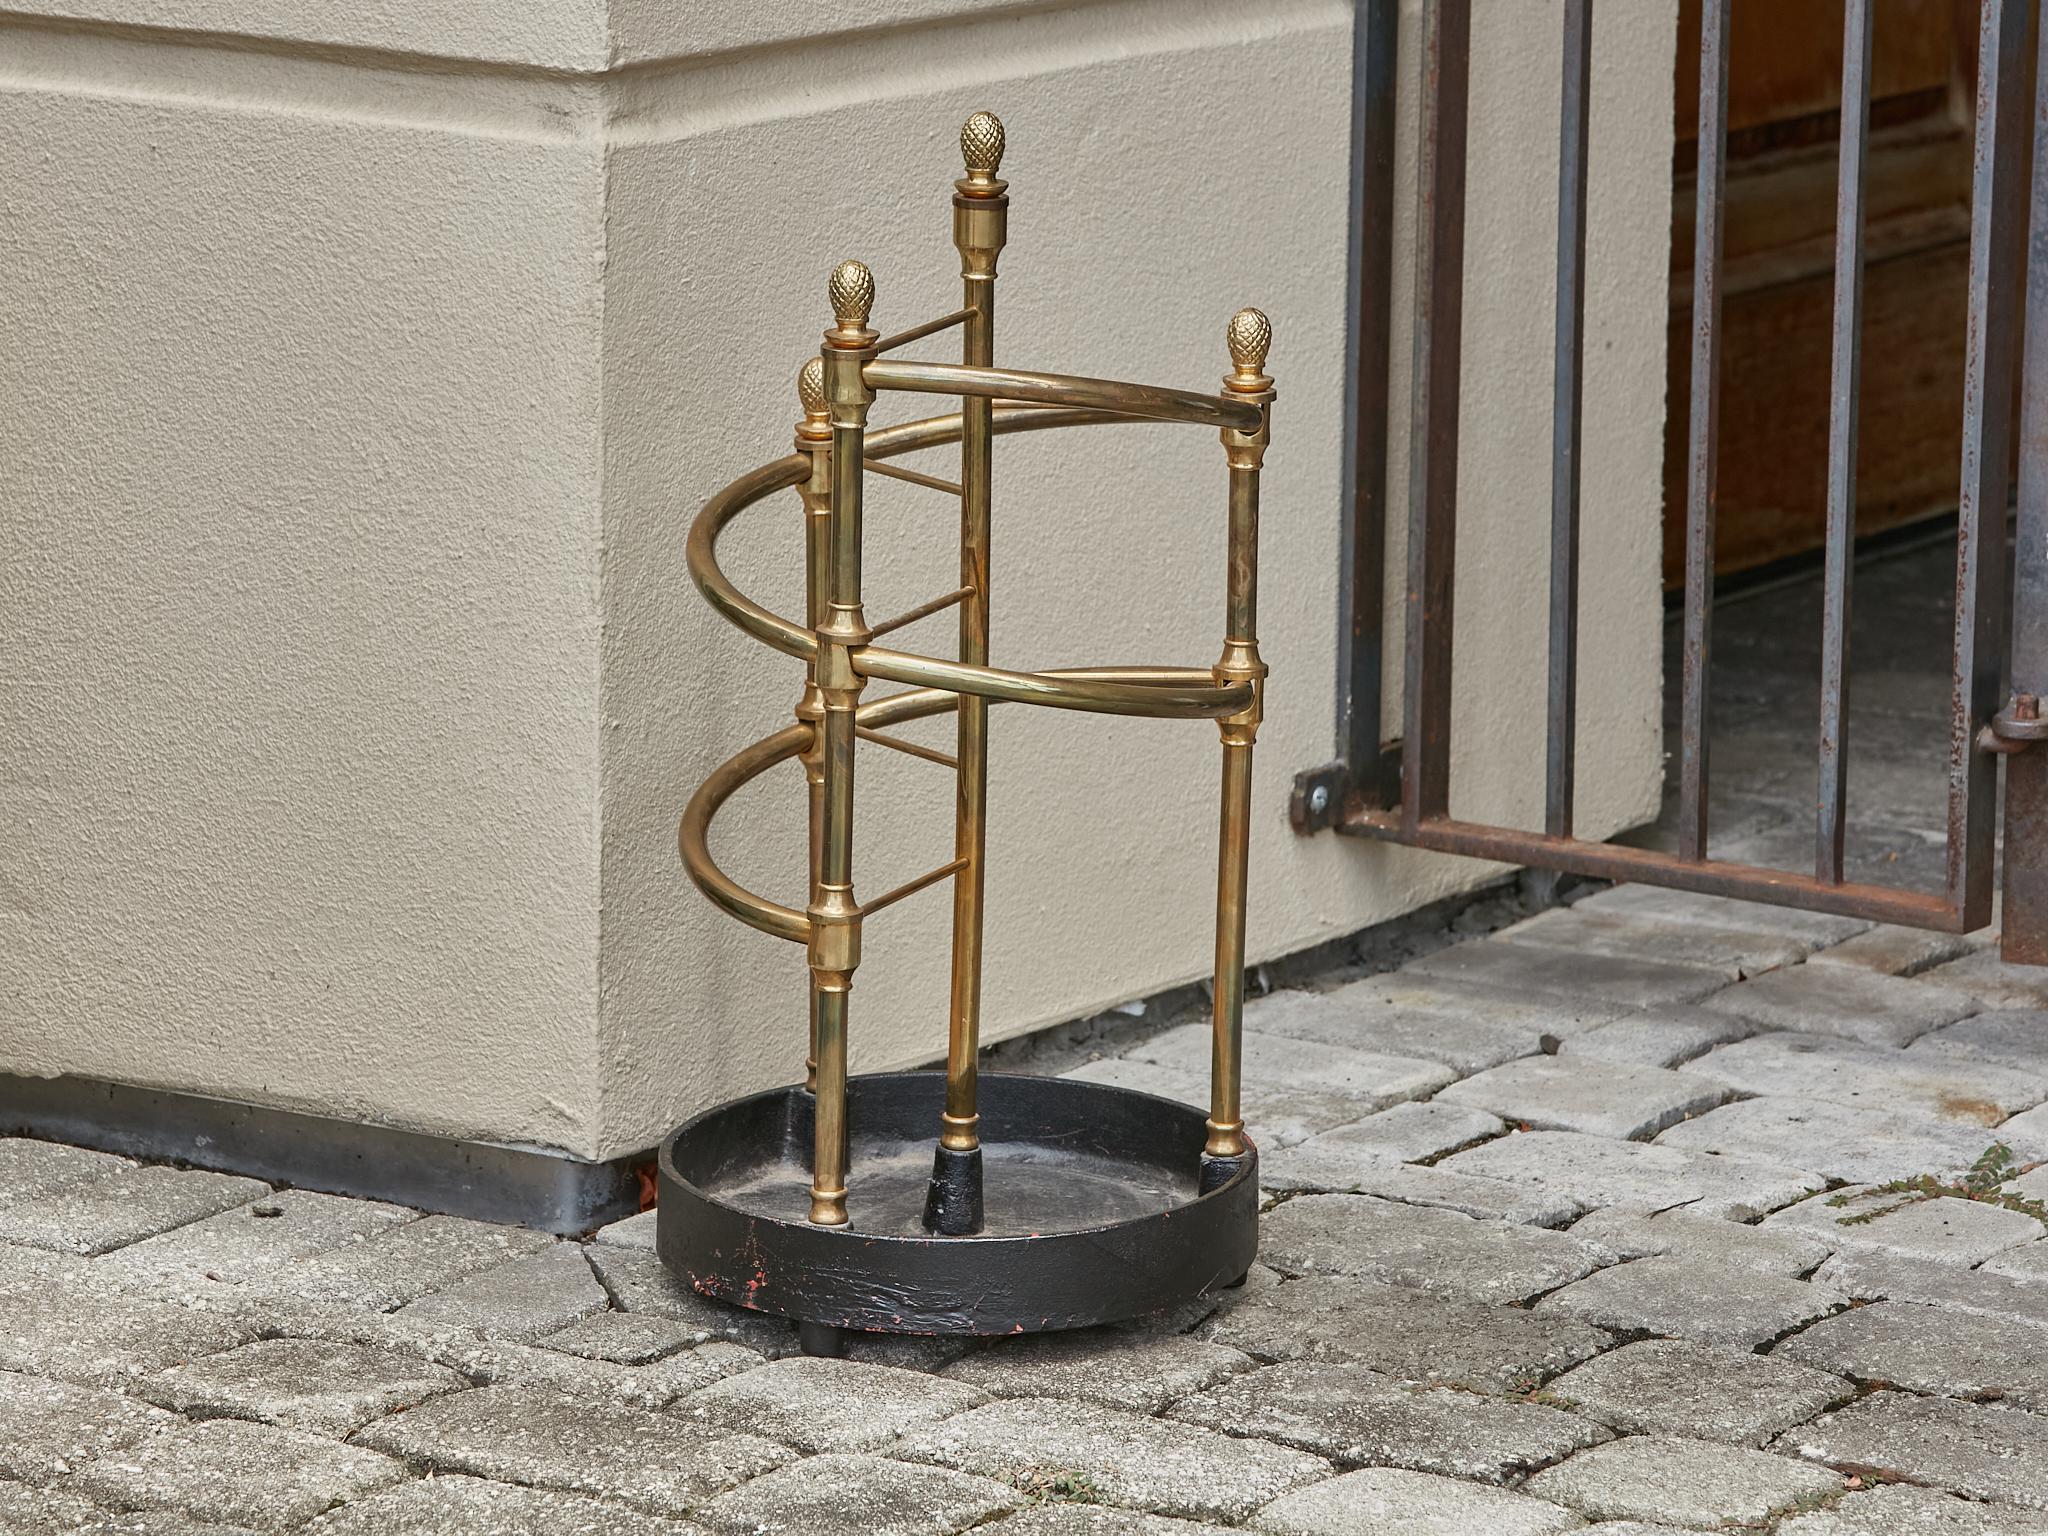 An English Late Victorian era brass umbrella stand from circa 1900 with pinecone motifs and iron base. Embrace the timeless elegance of the Late Victorian era with this exquisite English brass umbrella stand, circa 1900. Its captivating pinecone